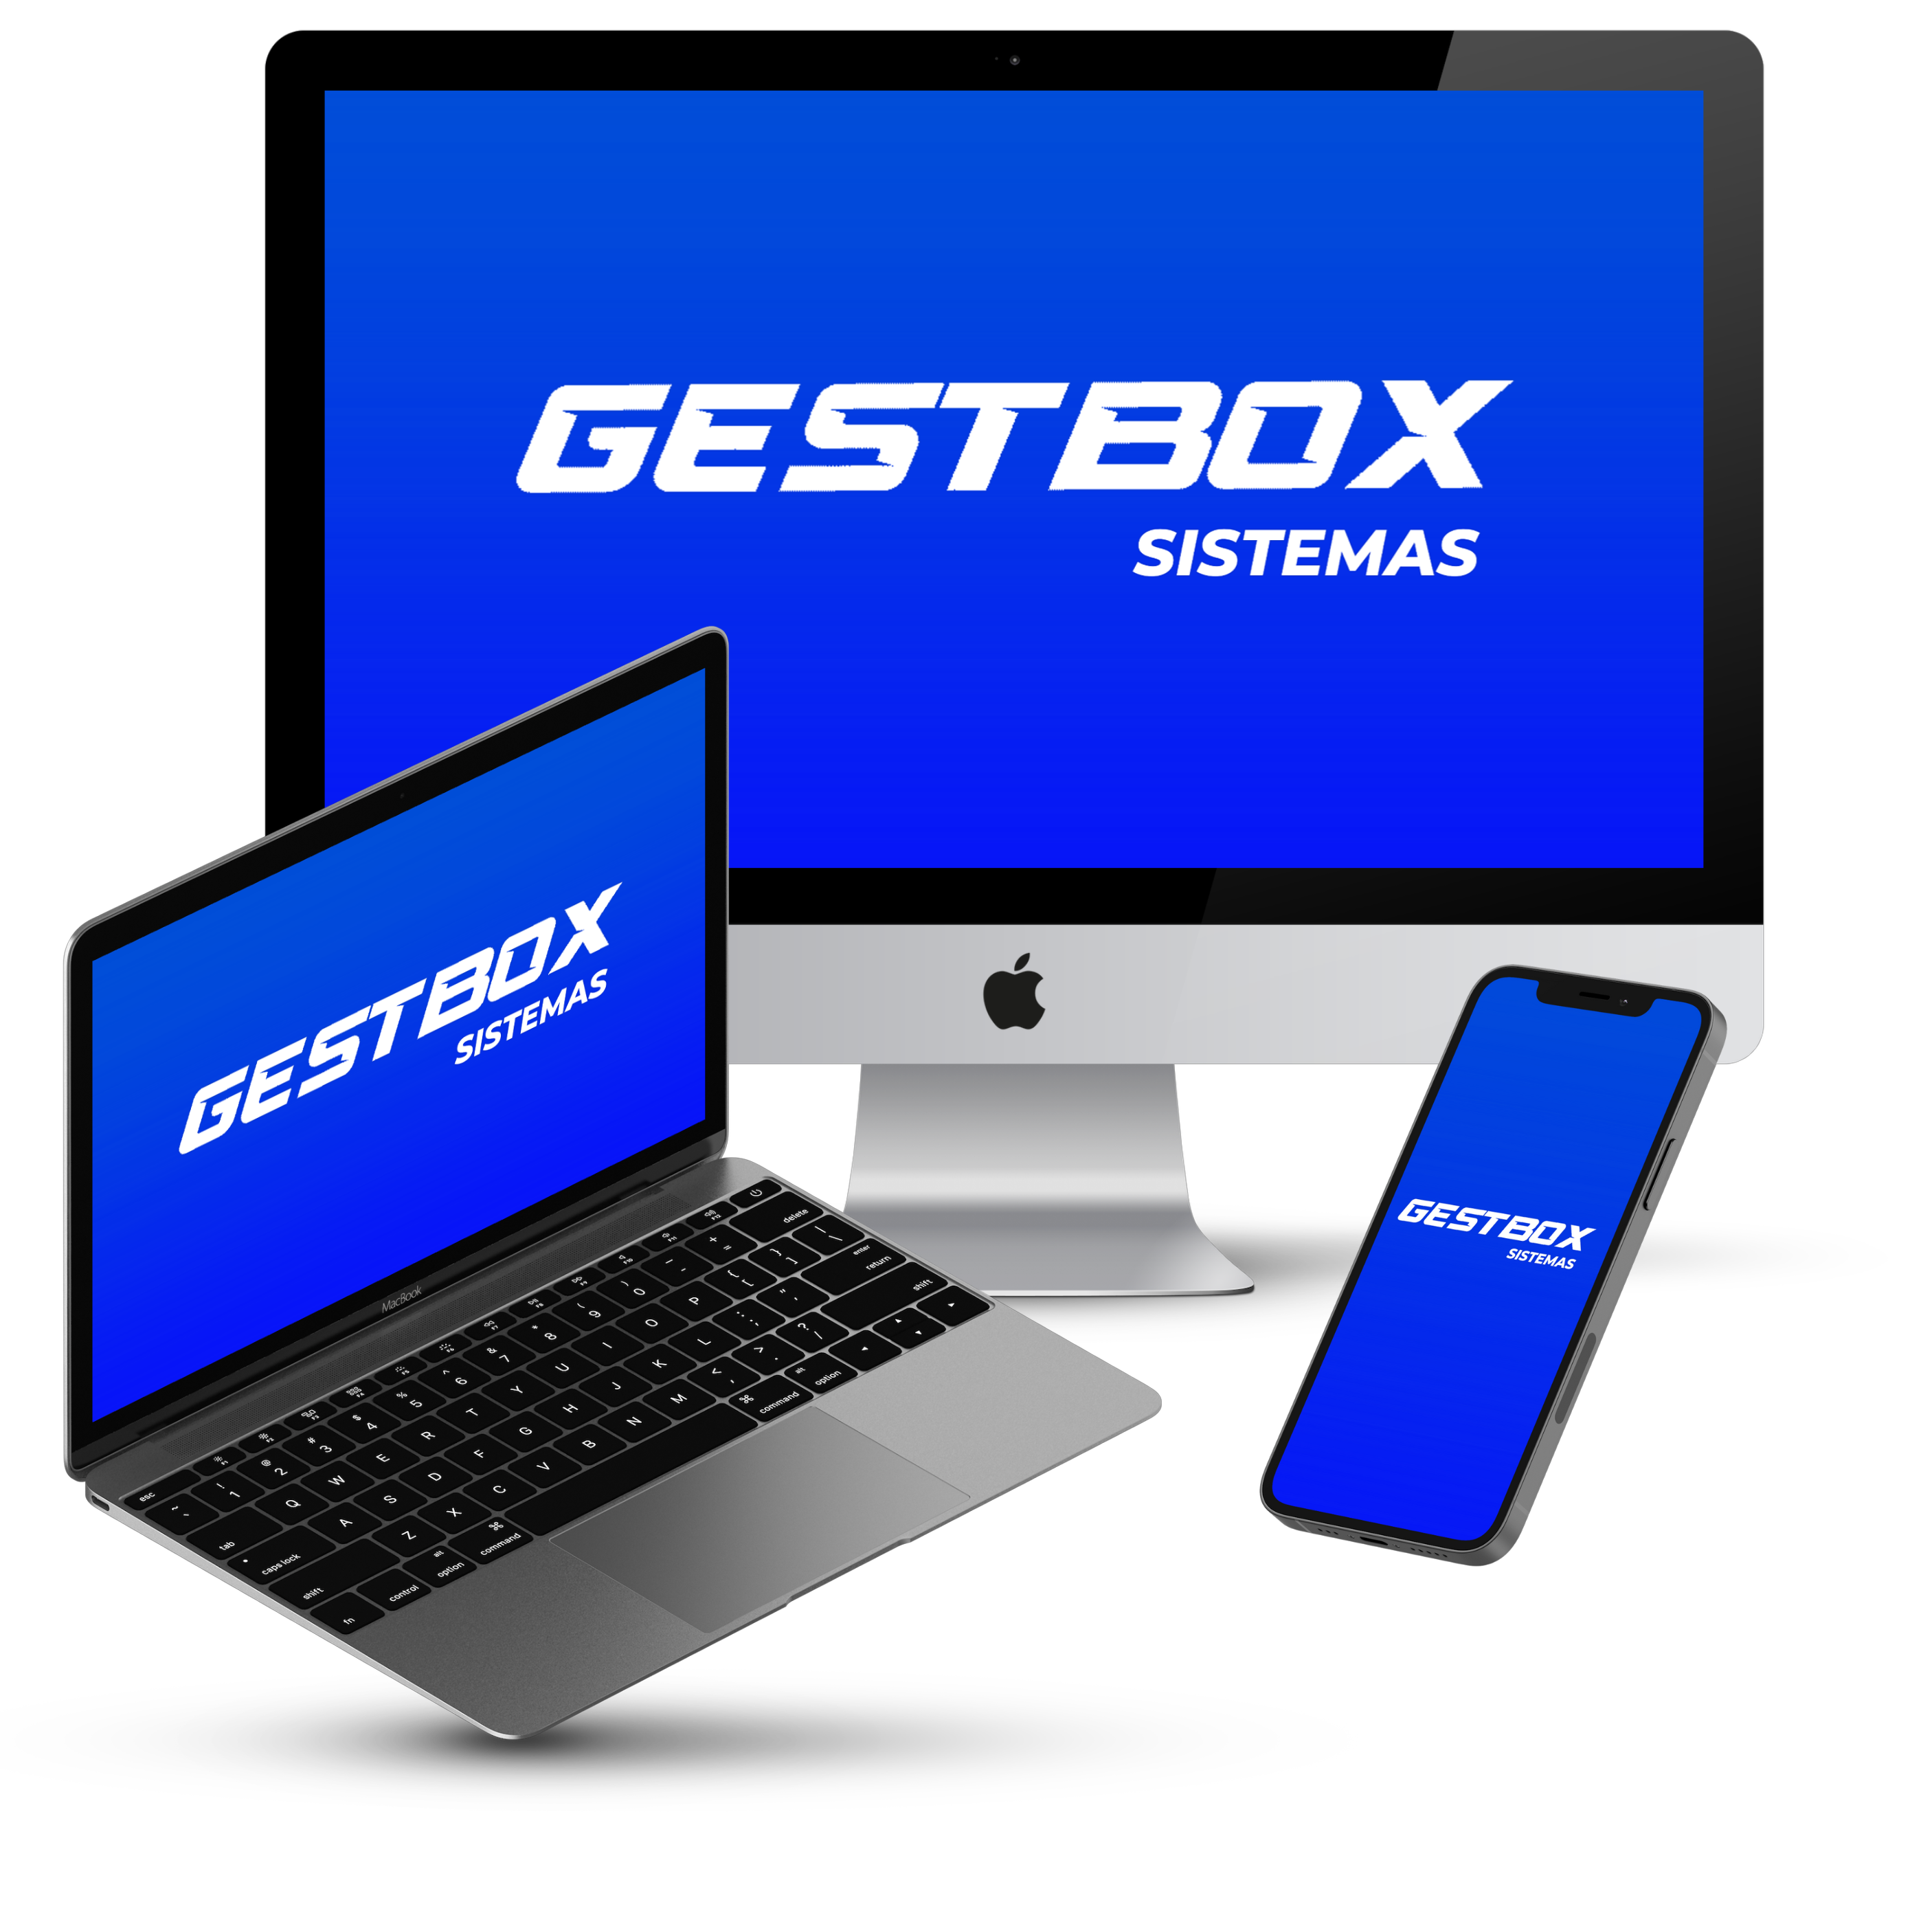 GESTBOX 2.0 (10)